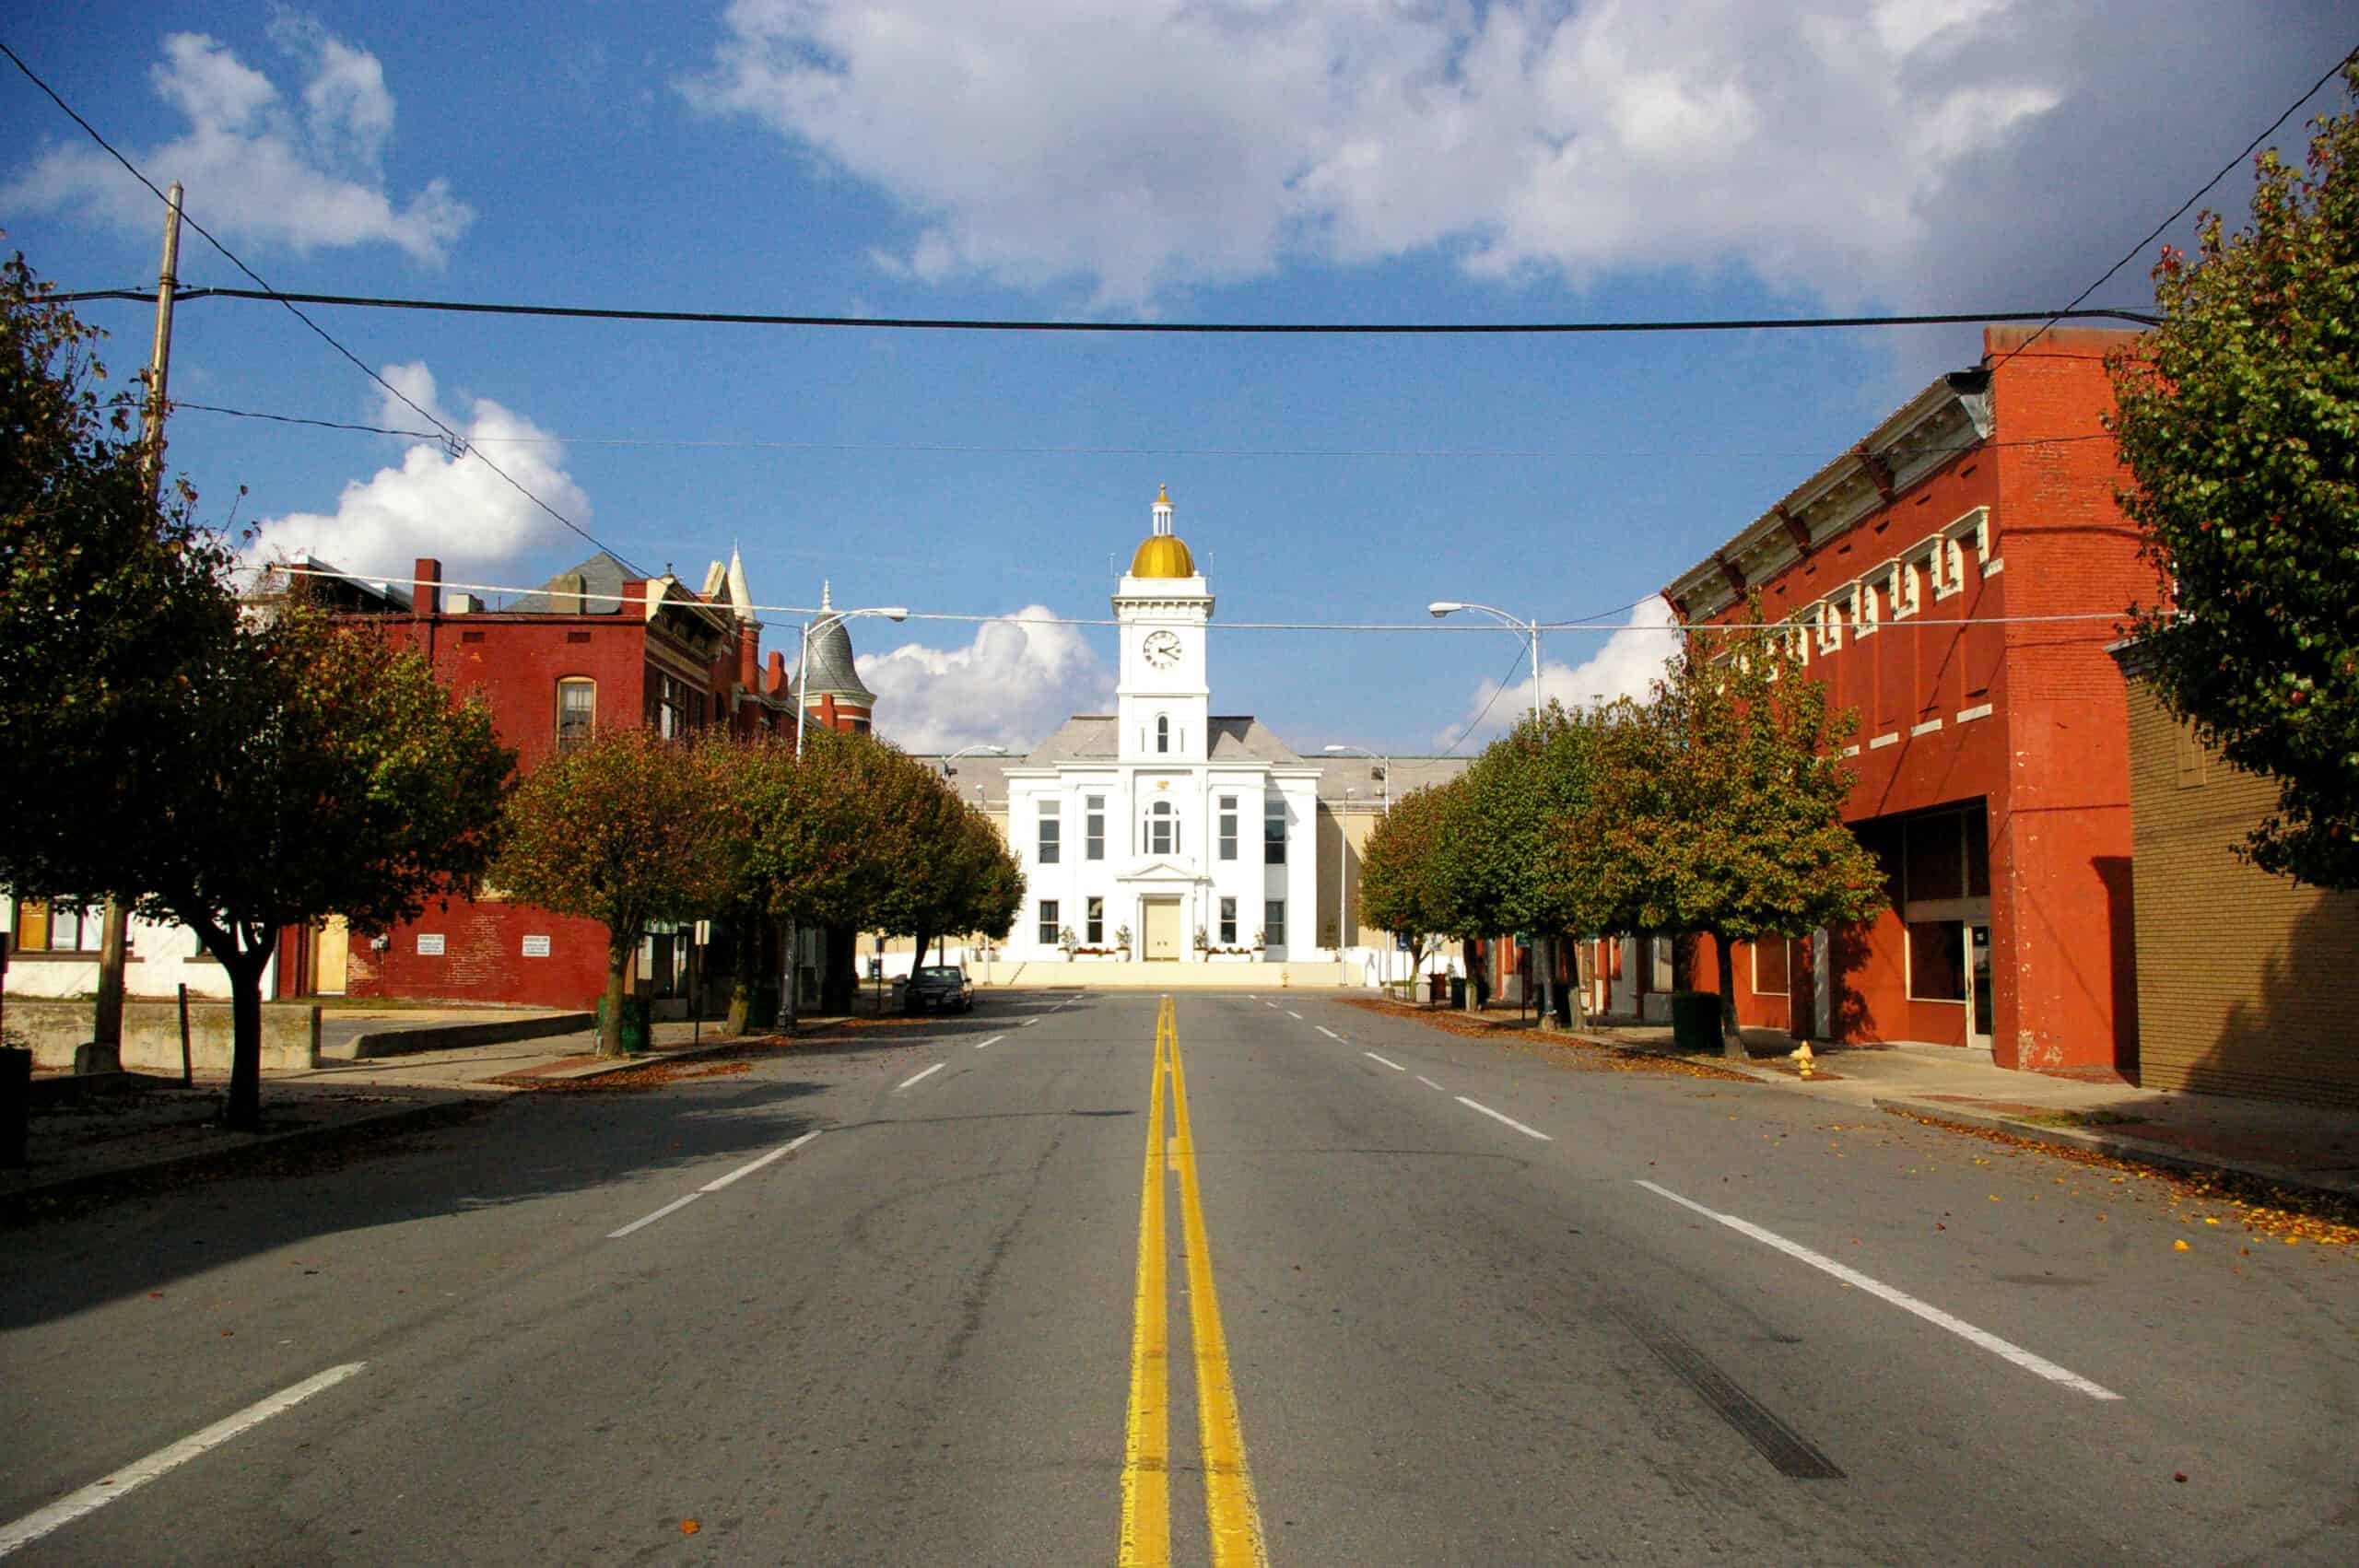 Looking down Main Street in Pine Bluff, Arkansas, USA with the Jefferson County Courthouse in the background. by Roland Klose